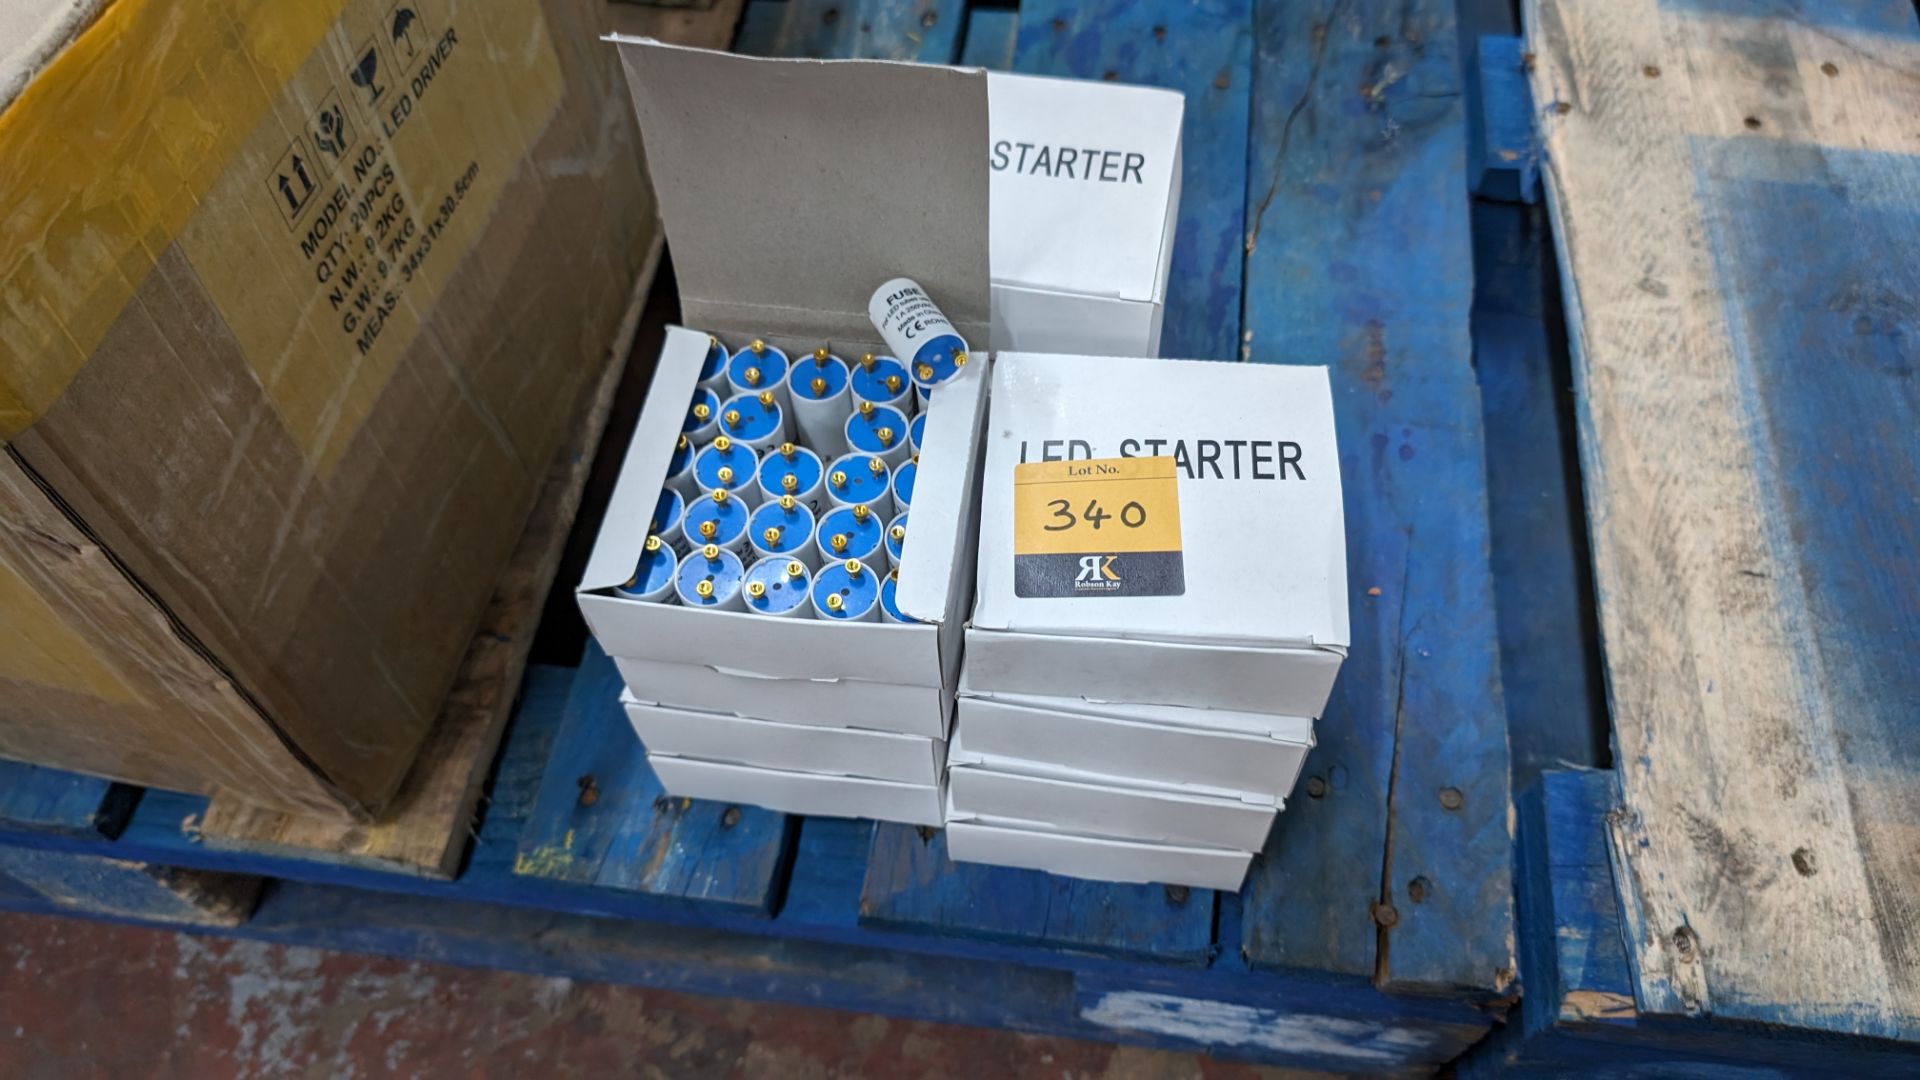 300 off LED starter fuses - 8 boxes - Image 2 of 4